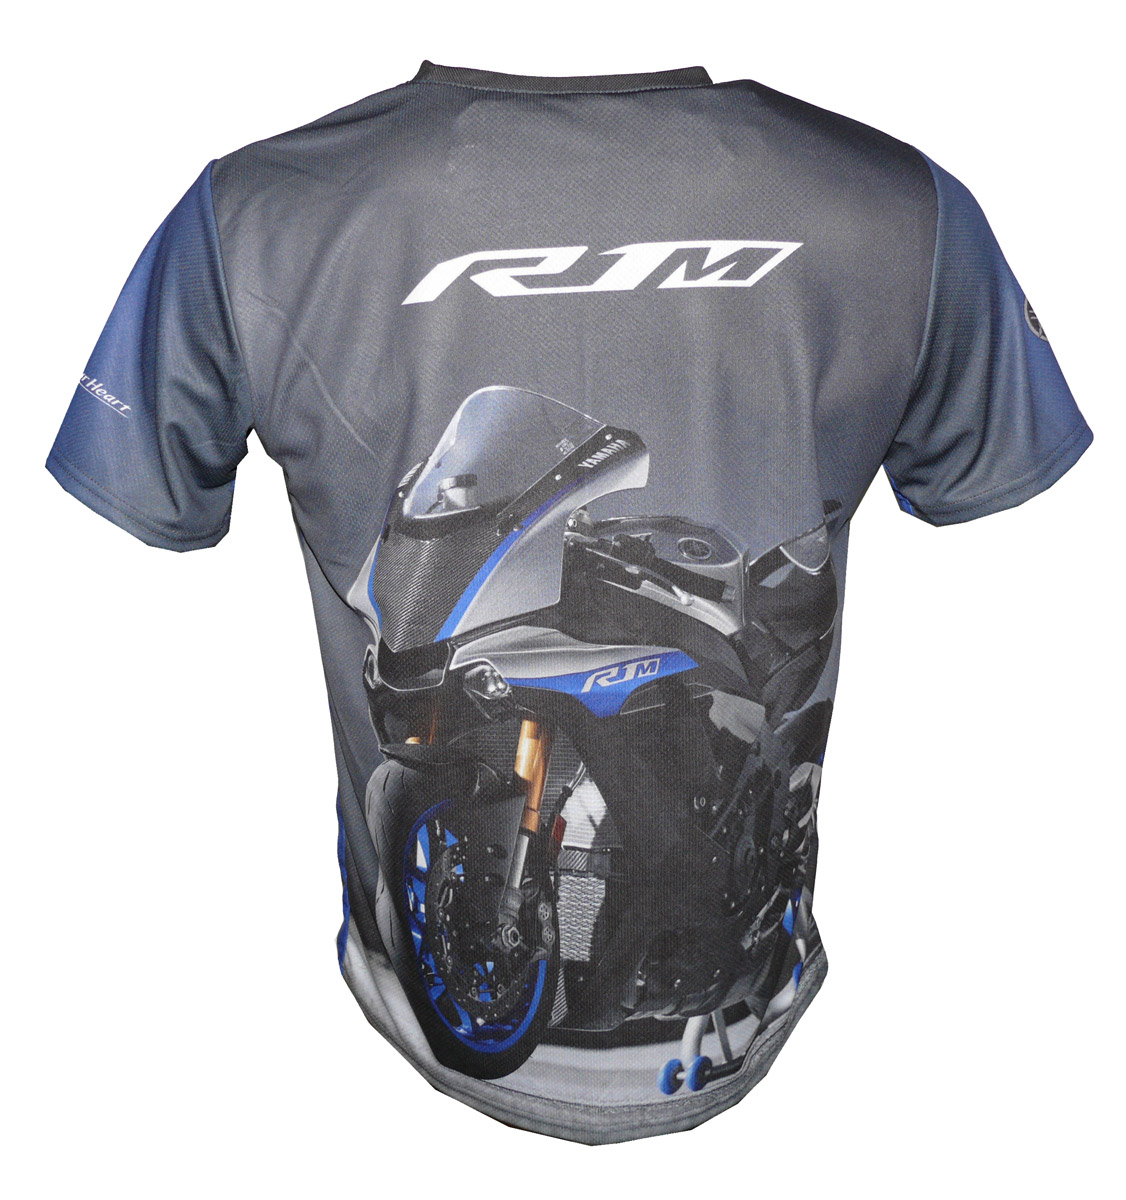 Yamaha R1m T Shirt With Logo And All Over Printed Picture T Shirts With All Kind Of Auto Moto